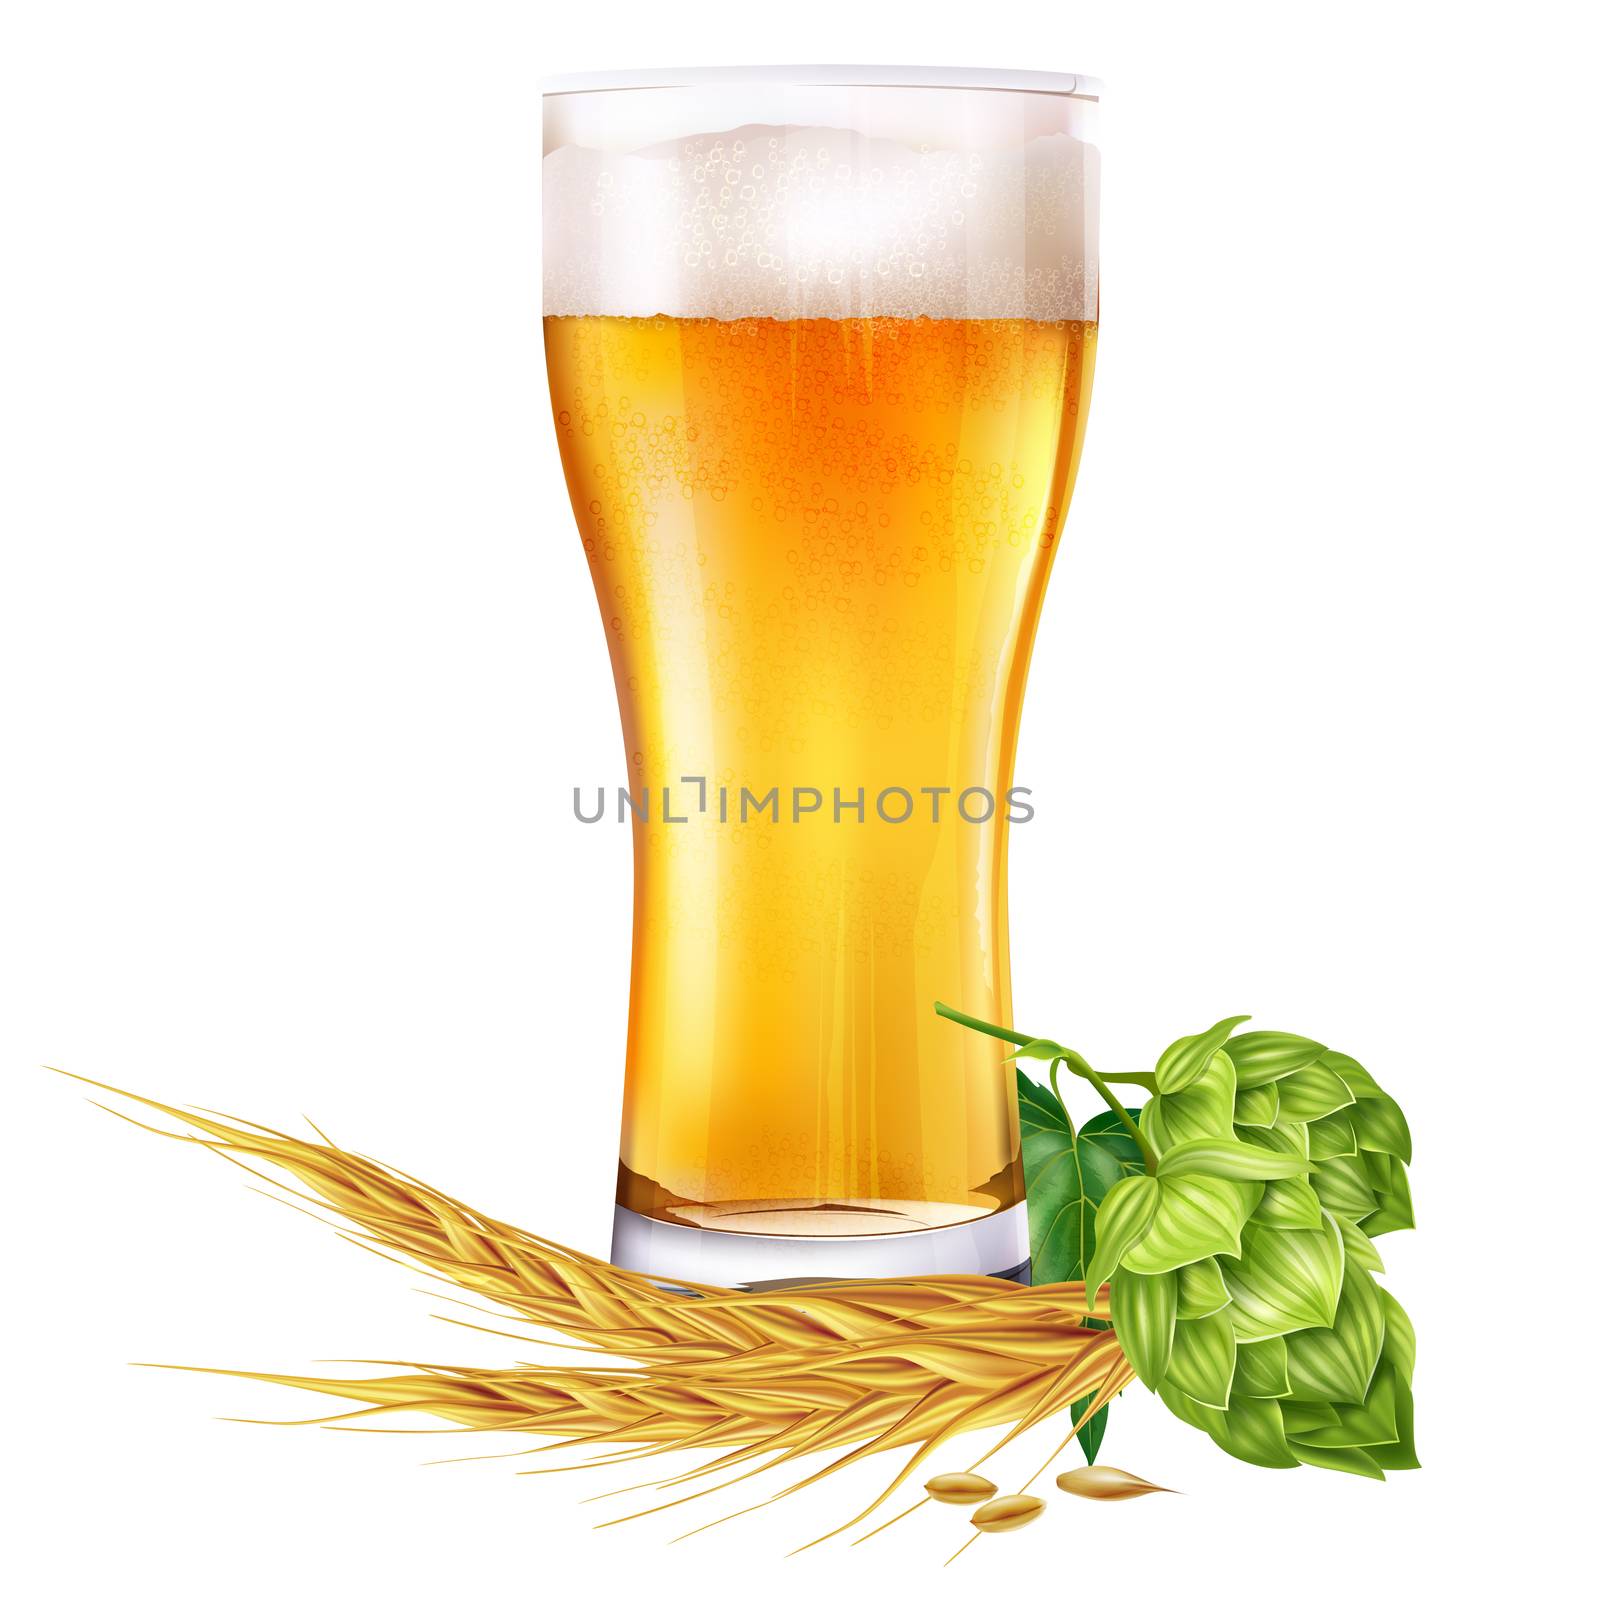 Glass of beer and hops. Isolated illustration on white background.